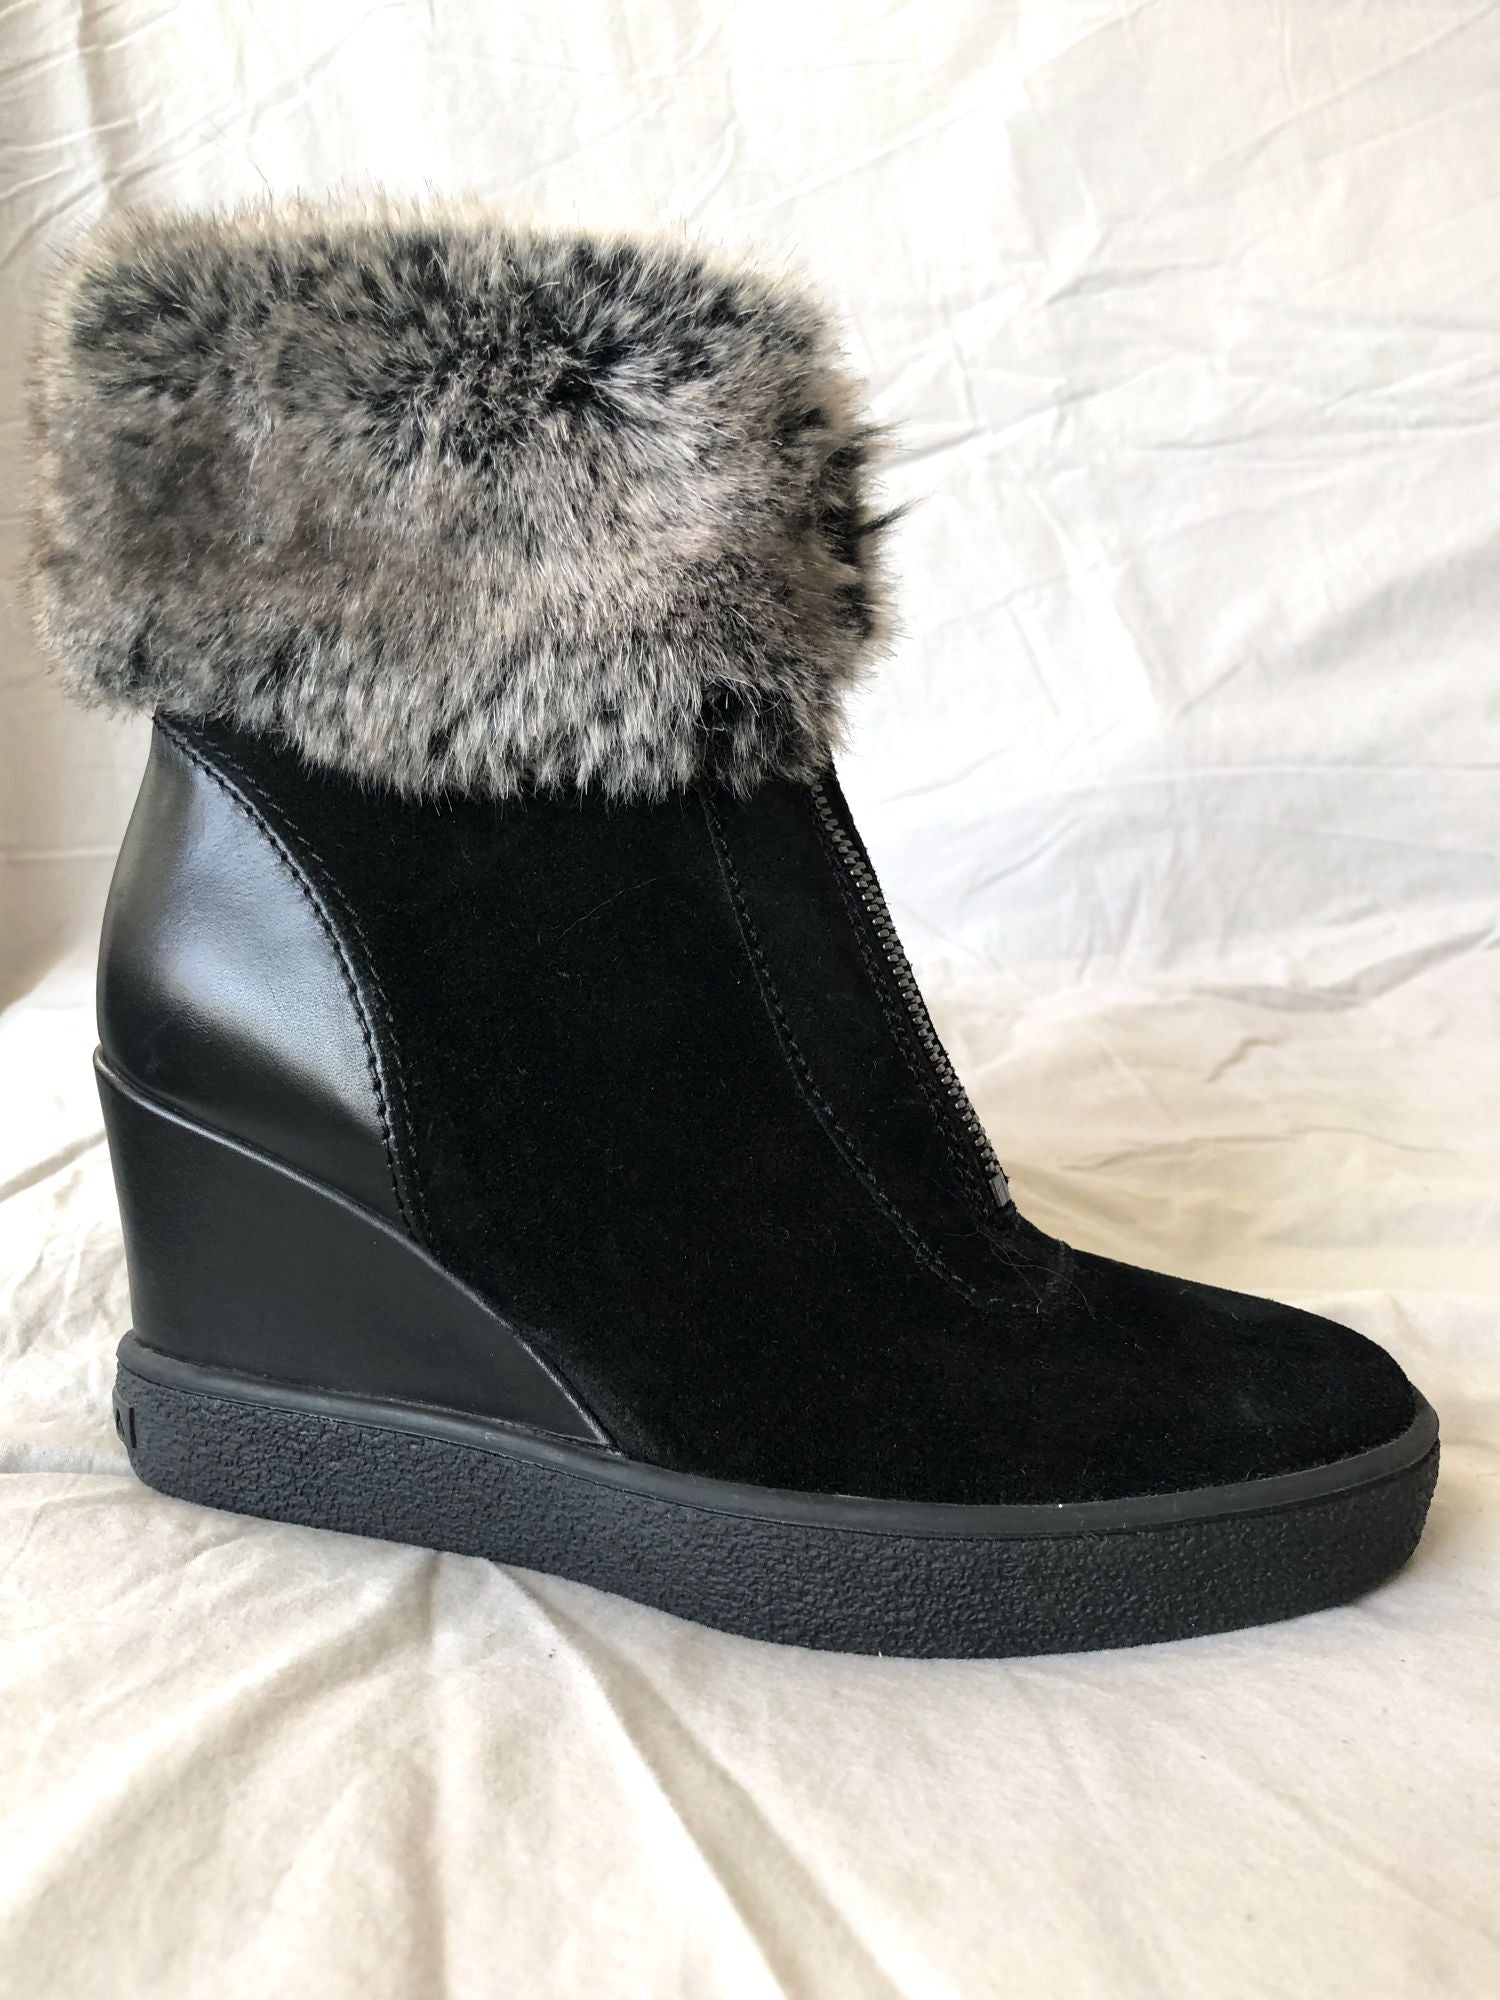 Aquatalia Size 5.5 - 6 NEW Fur Topped Wedge Boots